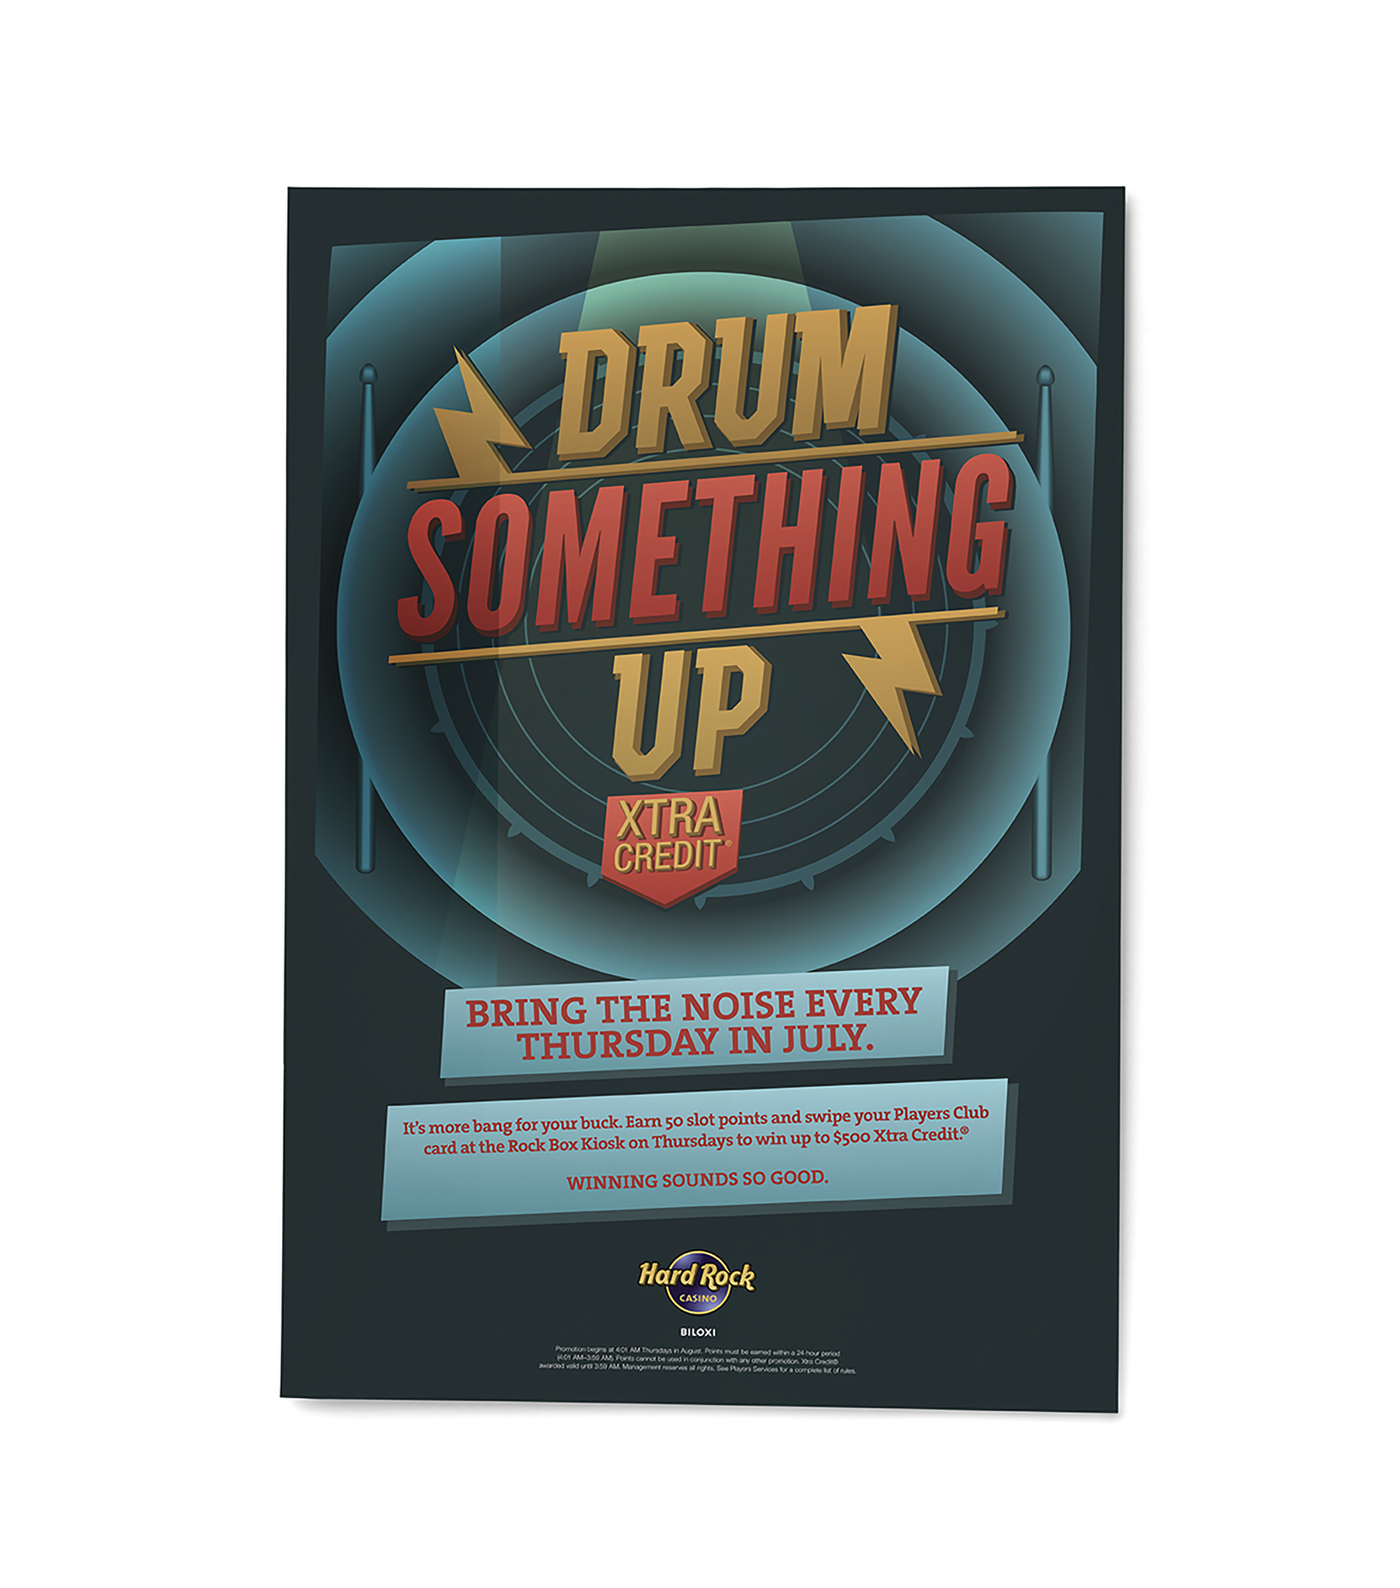 Drum Something Up: Bring the noise every Thursday in July.